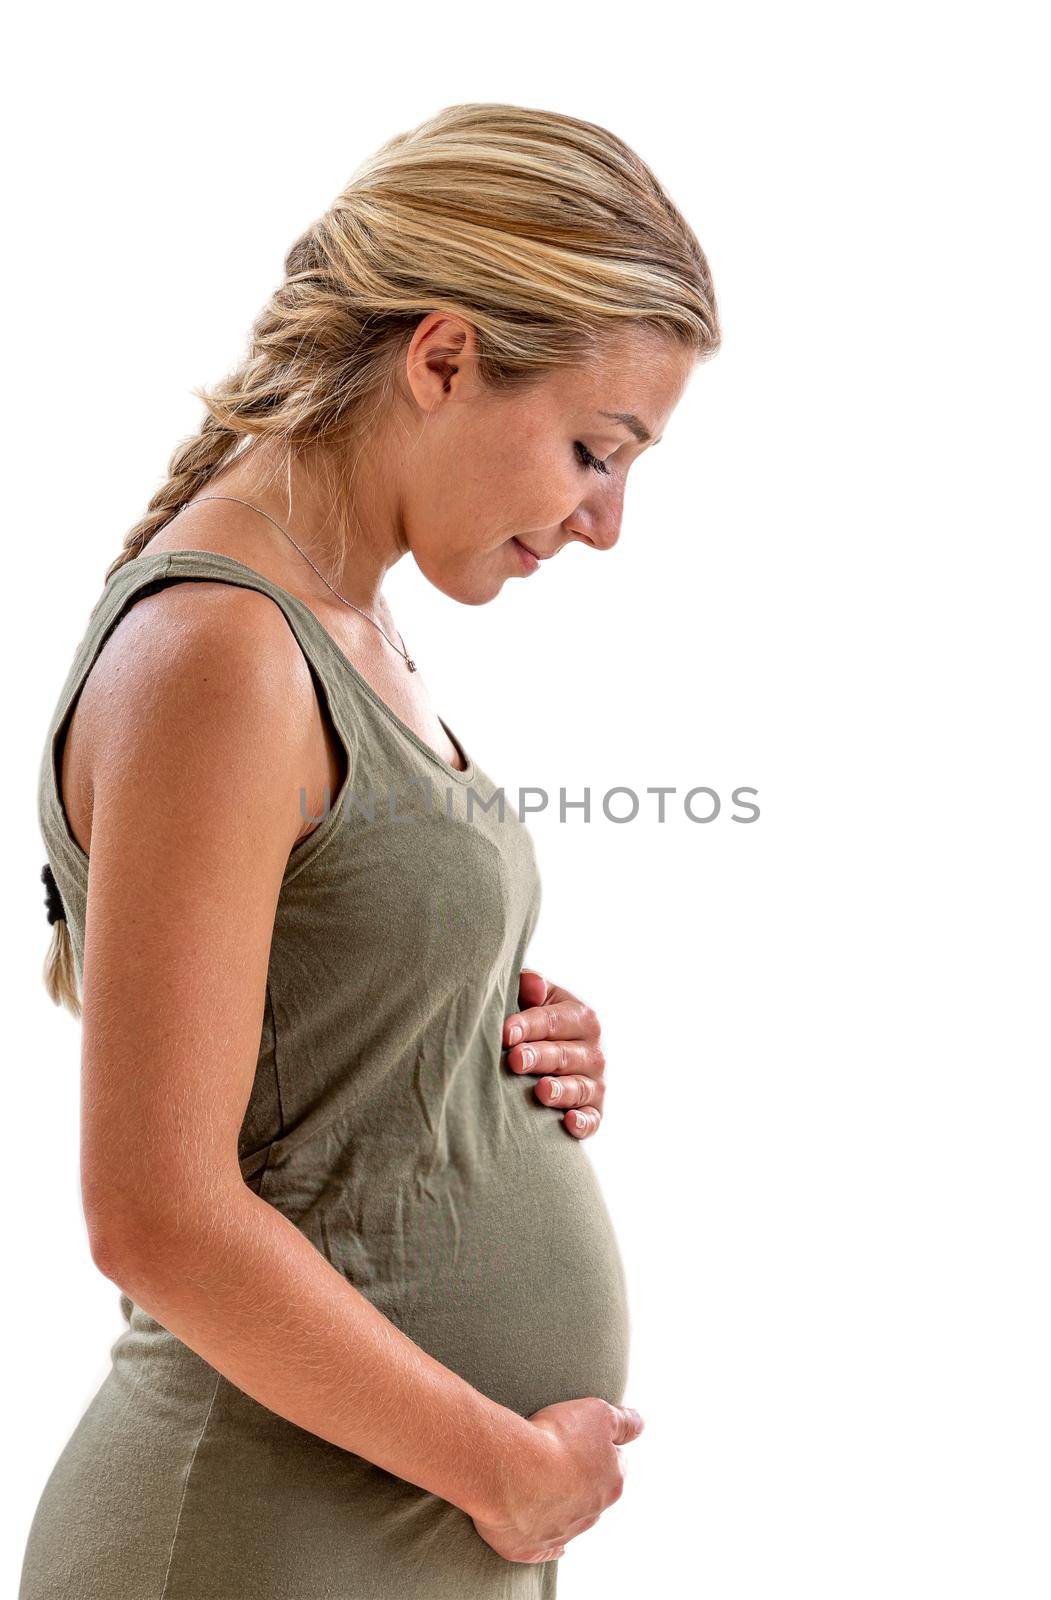 Pregnant woman in profile looking at her belly on a cropped white background. by JPC-PROD